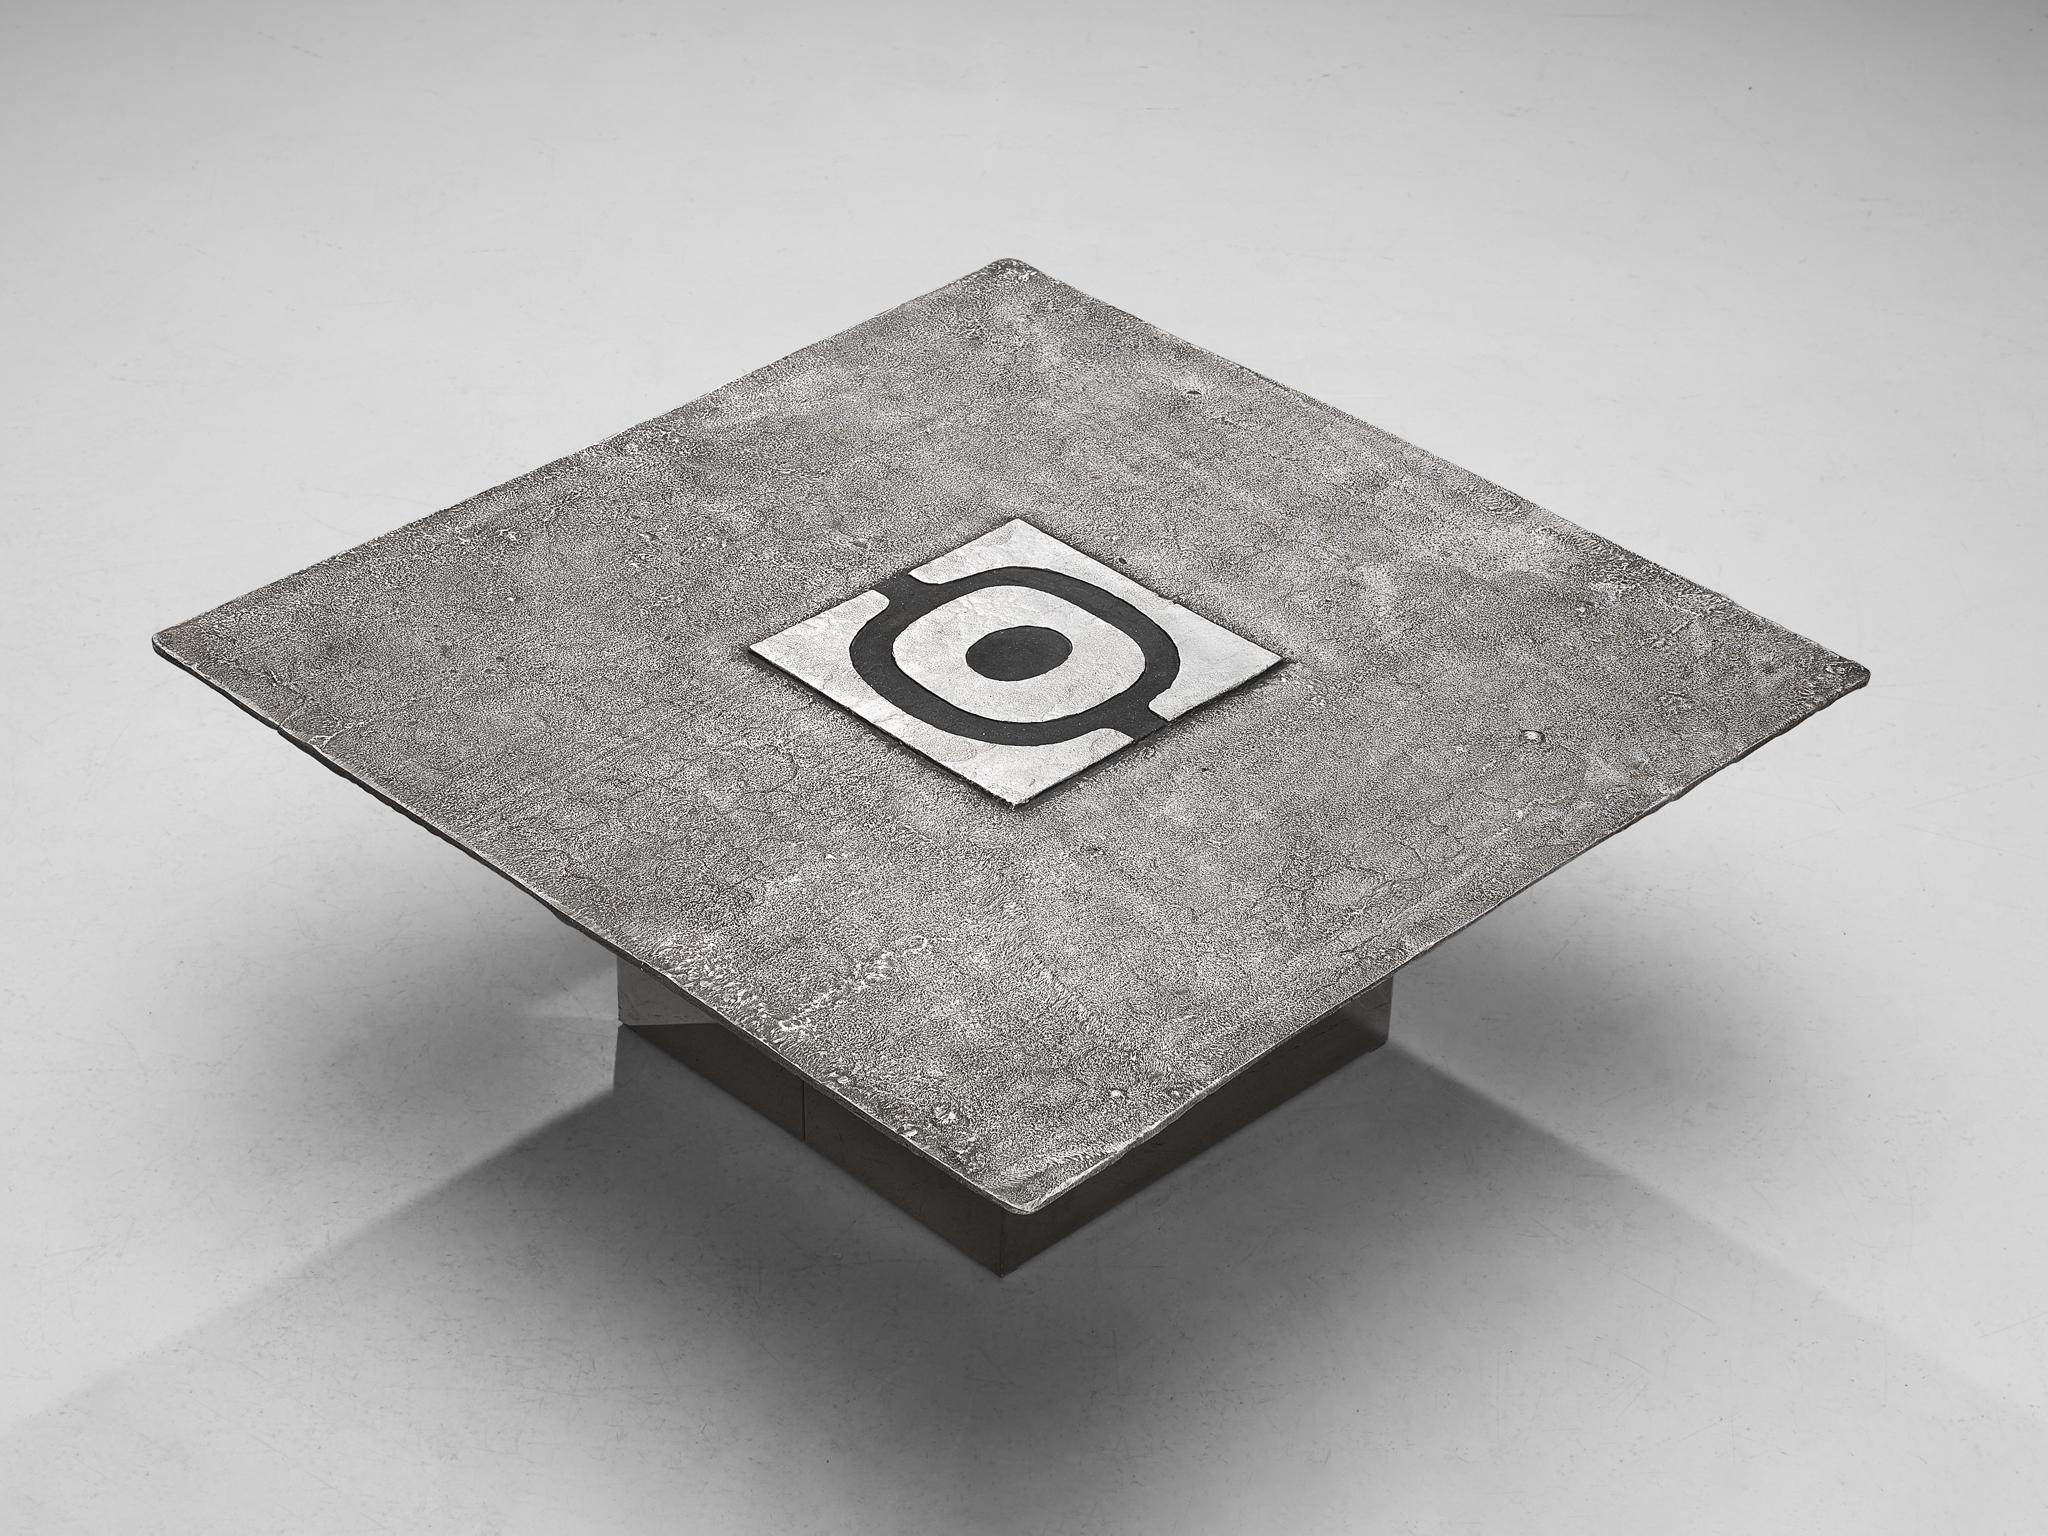 Willy Ceysens, coffee table, cast aluminum, Belgium, 1970s

Alluring coffee table designed by Willy Ceysens. This remarkable item is a true eye catcher with its outstanding cast aluminum exterior. The silver square tabletop with an eye-like